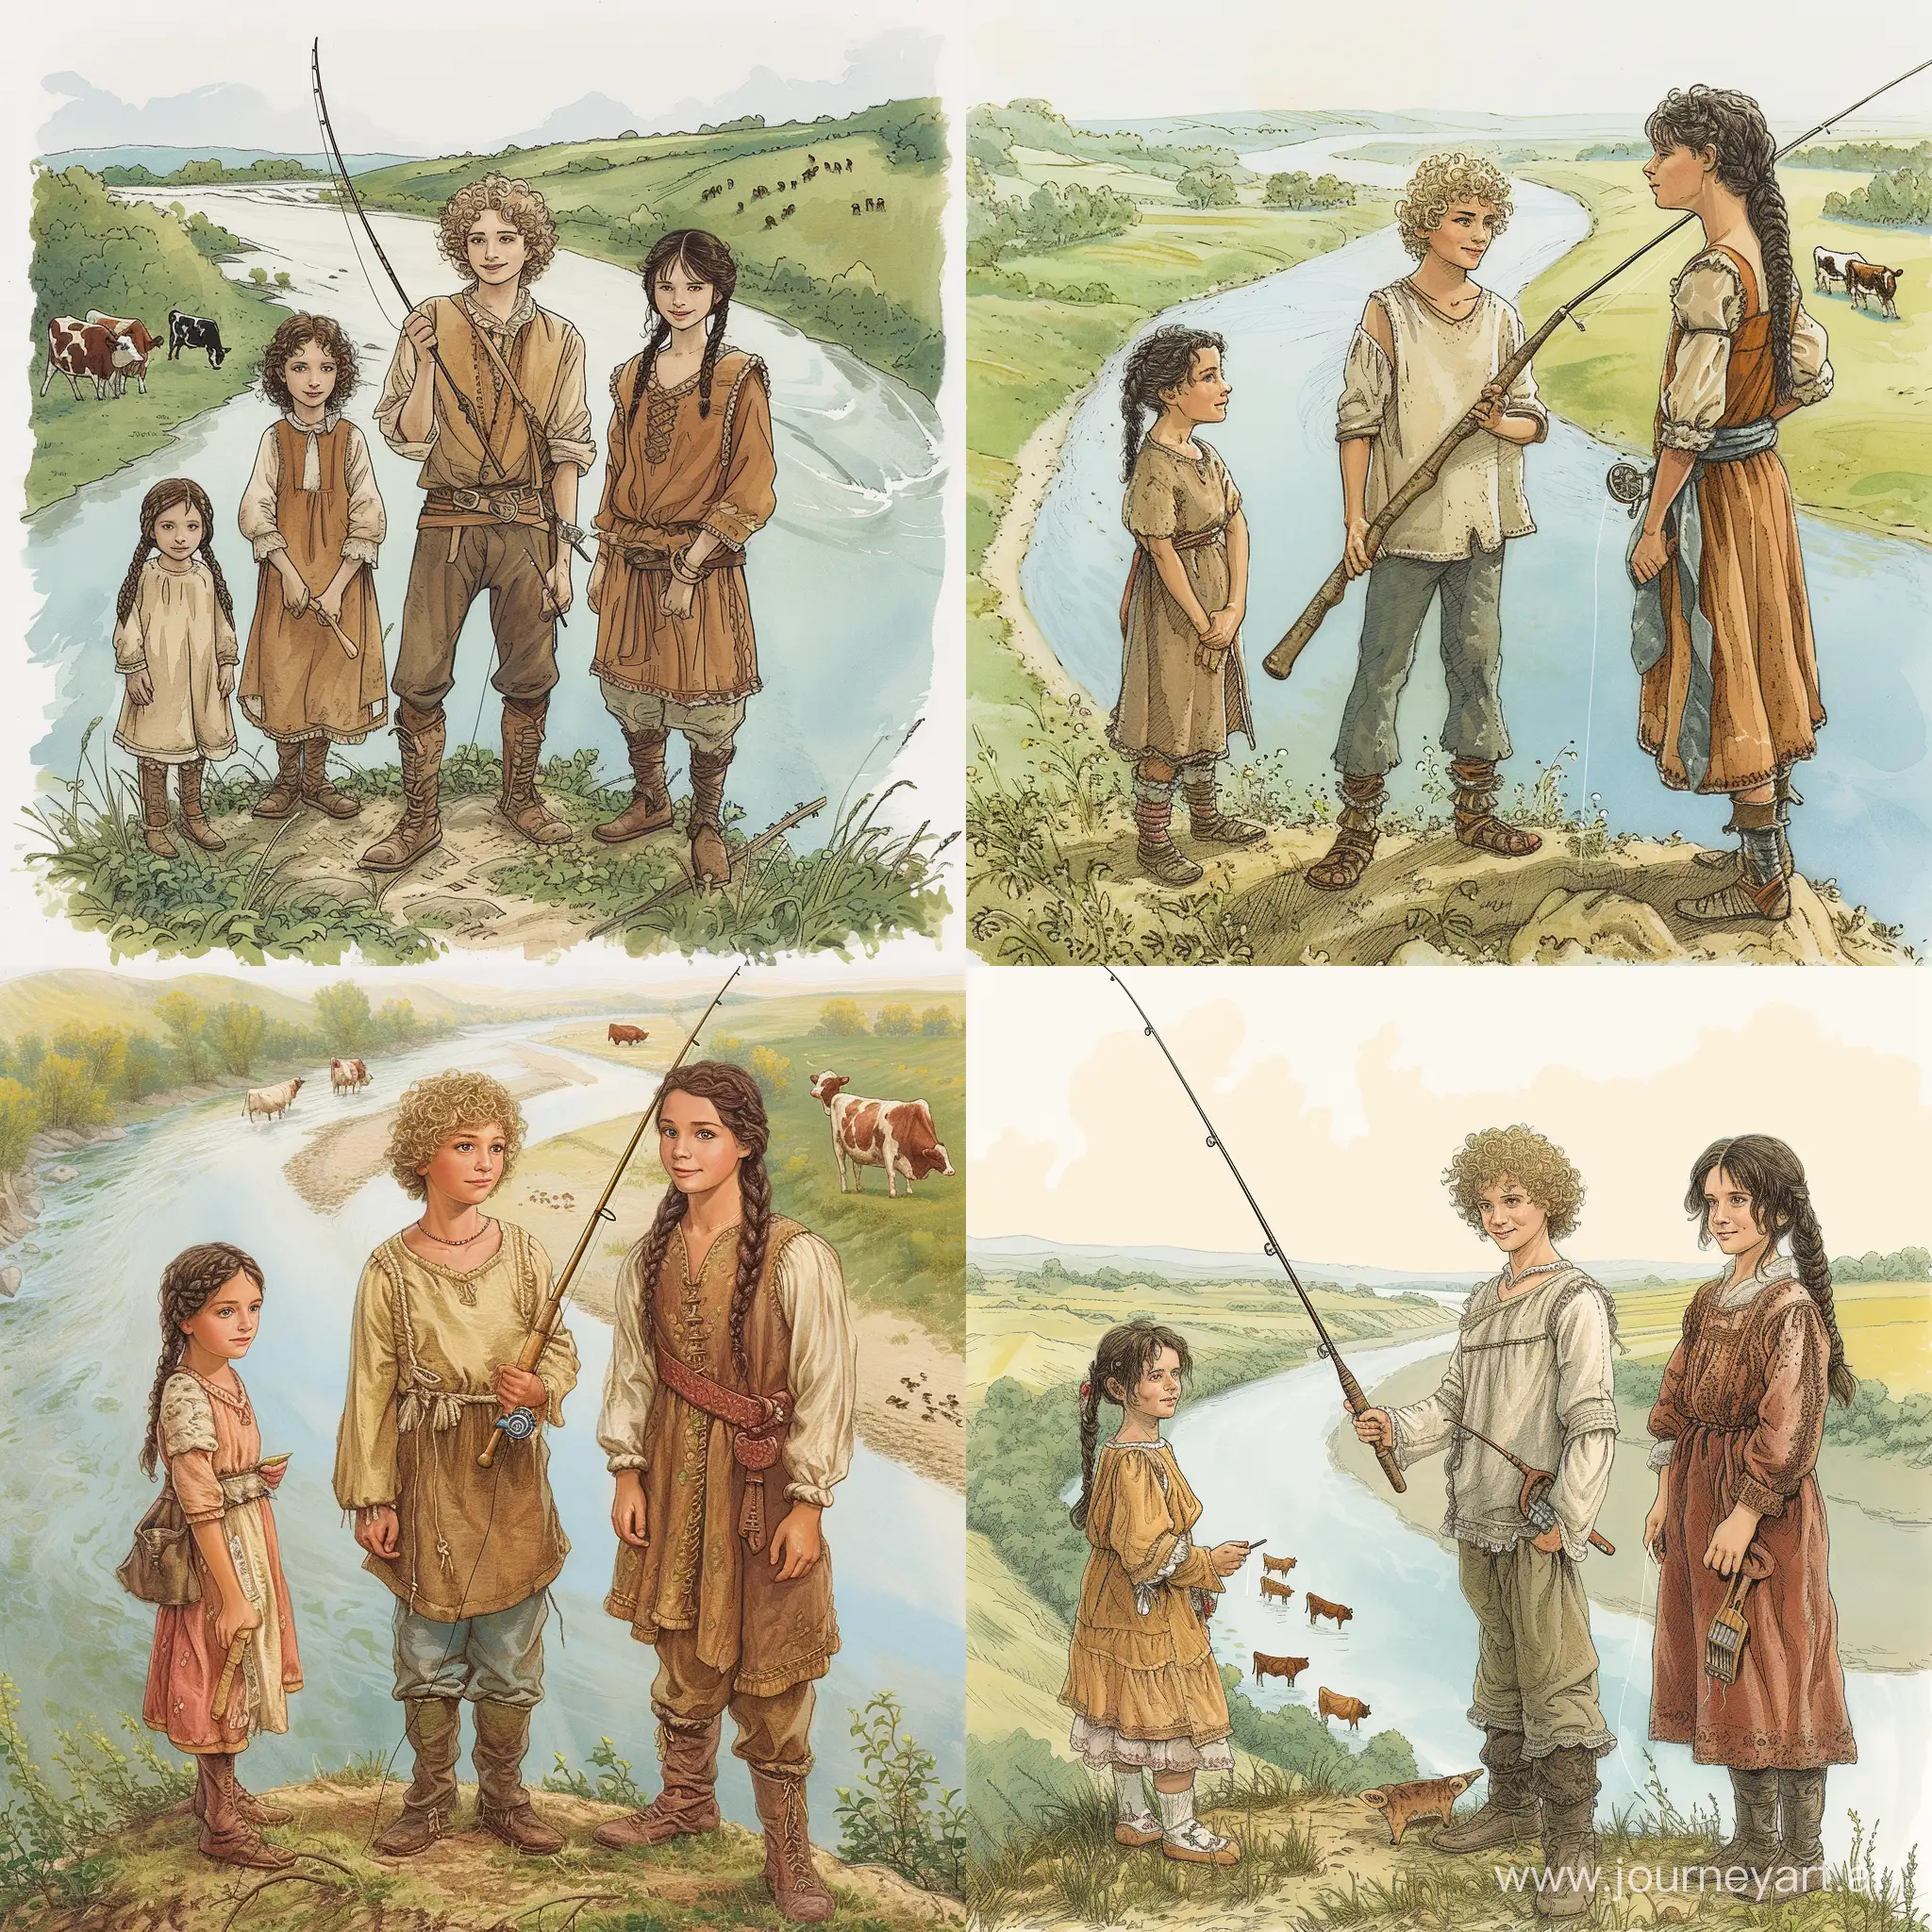 book illustration, three people, (a thirteen-year-old boy with light curly hair, holding a fishing rod in his left hand), (a five-year-old girl with dark hair, braided), stands to the left of the boy, (a sixteen-year-old girl with dark hair, braided), stands to the right of the boy, dressed in peasant clothes, they stand on a hill, against the background of a winding river, sunny day, summer, noon, cows graze across the river